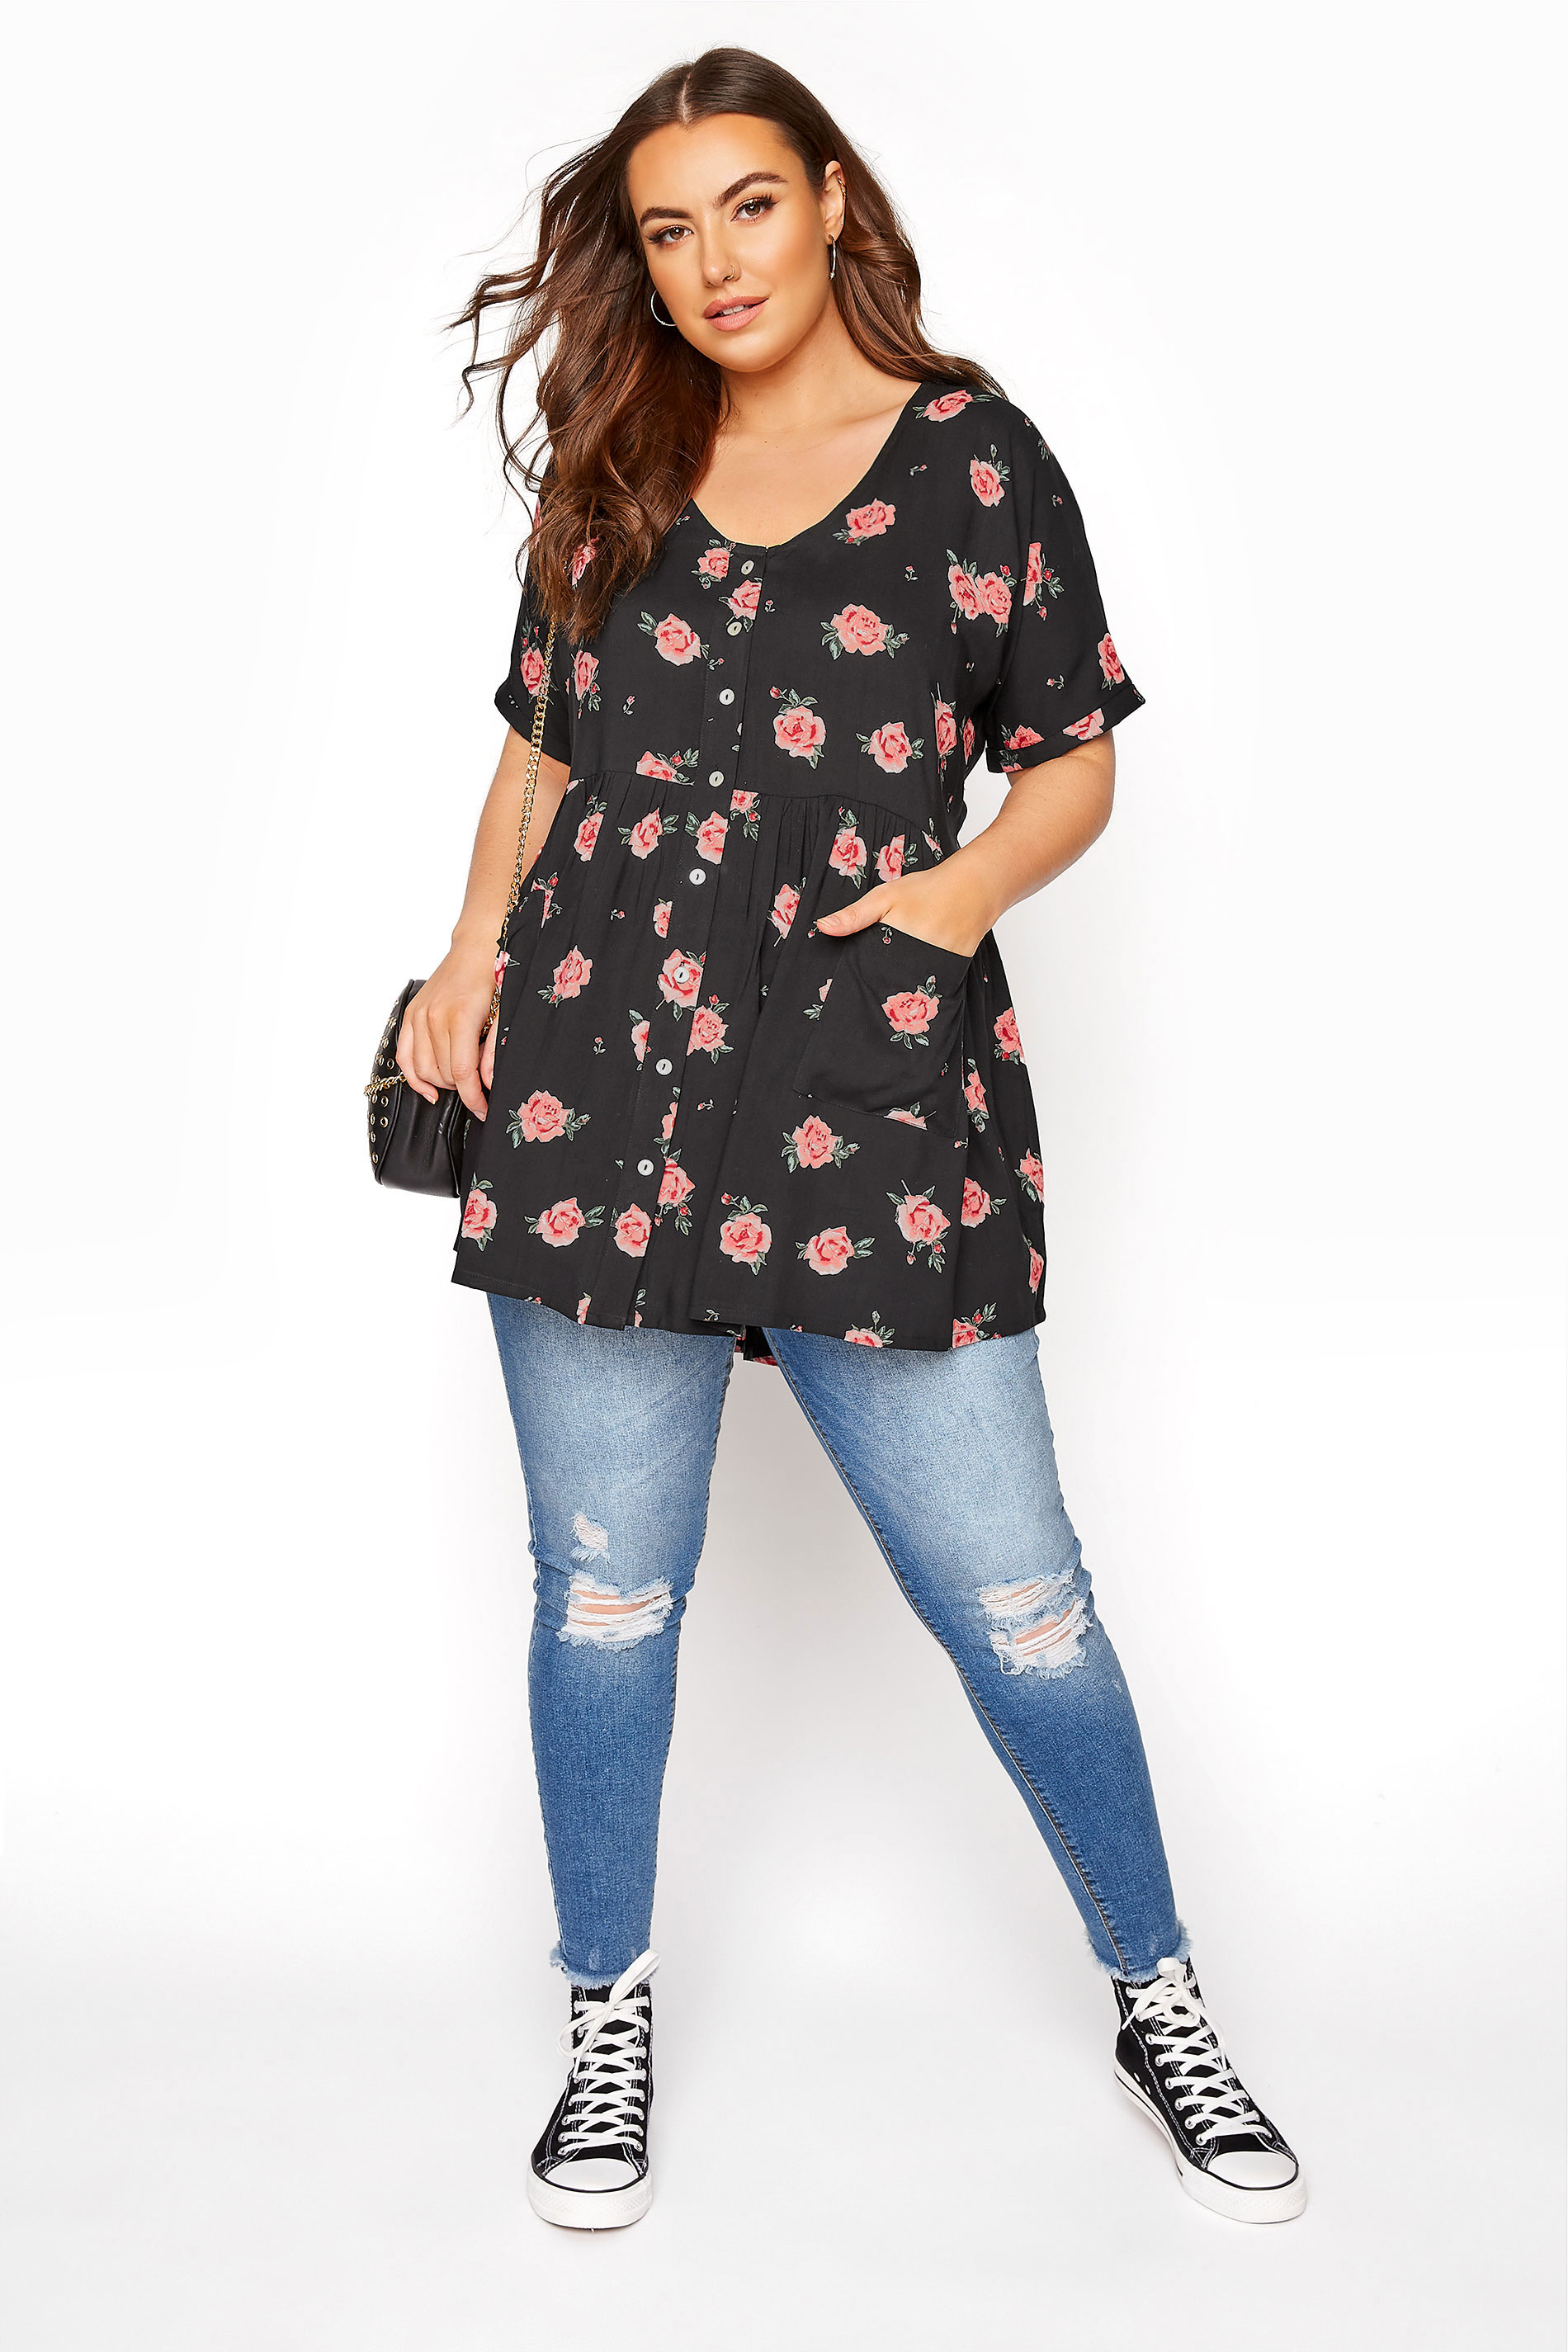 Black Floral Print Button Front Peplum Top | Yours Clothing